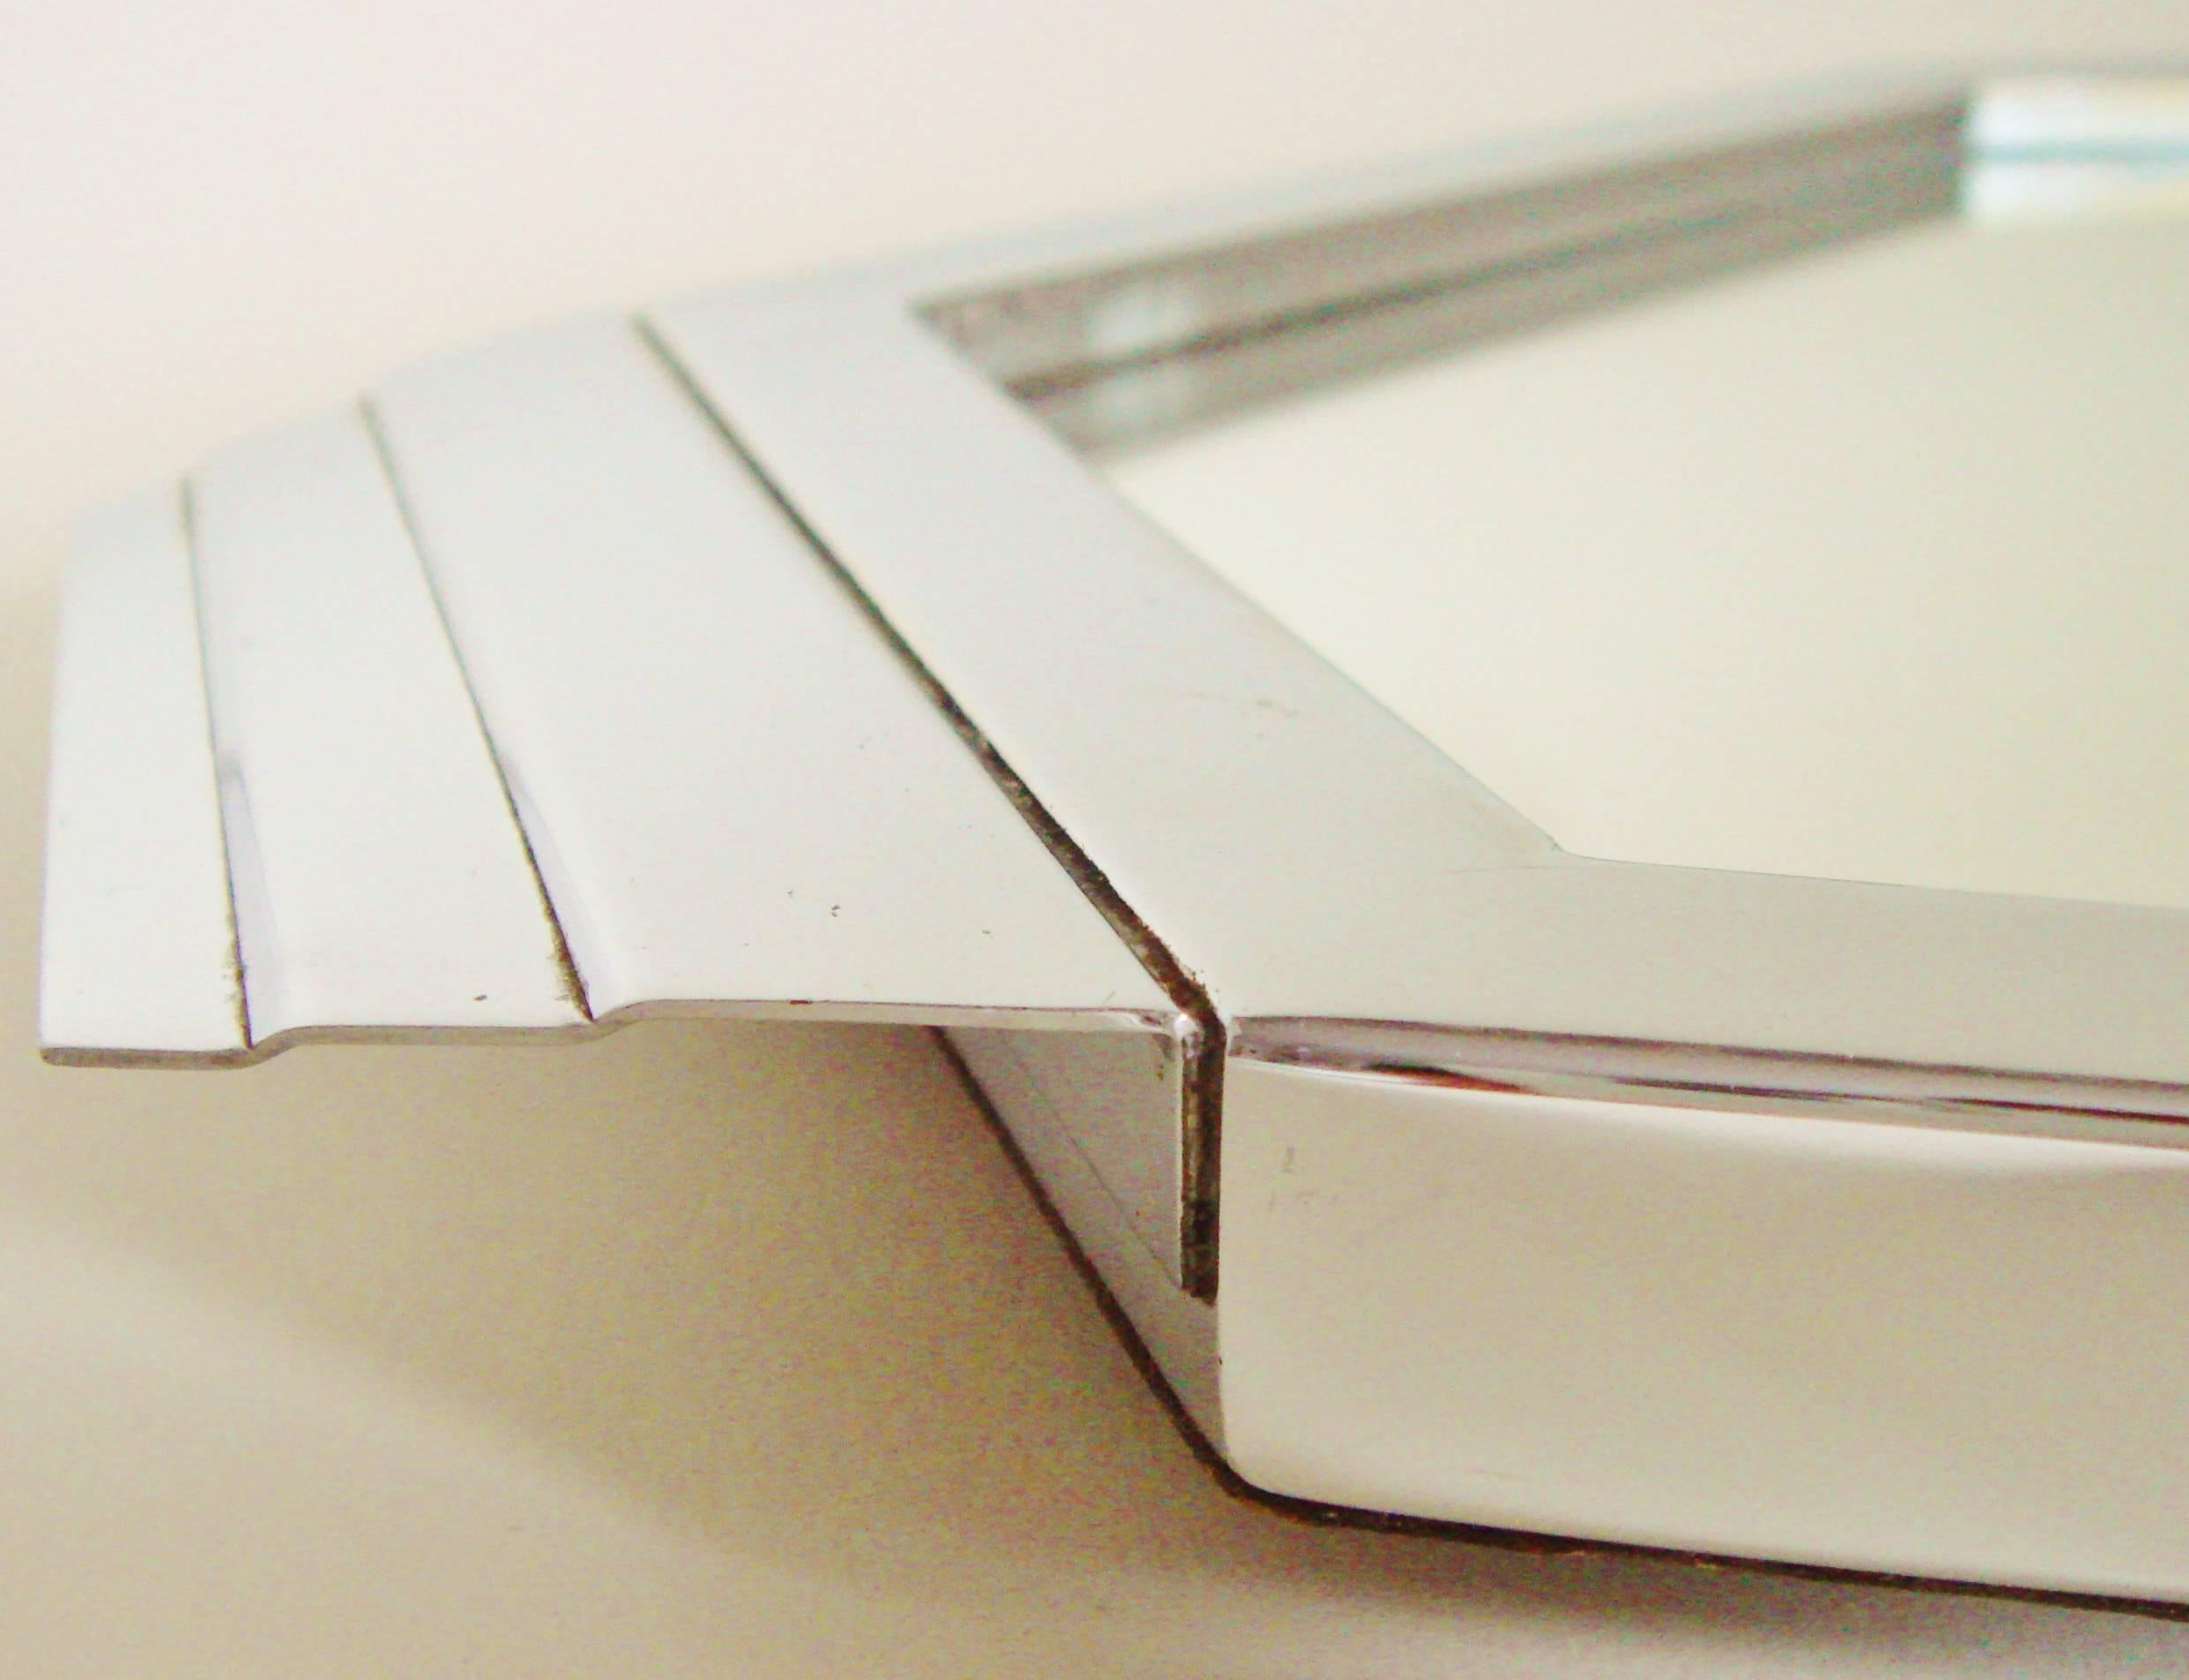 Plated Large Czechoslovakian Art Deco Geometric Chrome & Mirror Footed Cocktail Tray.